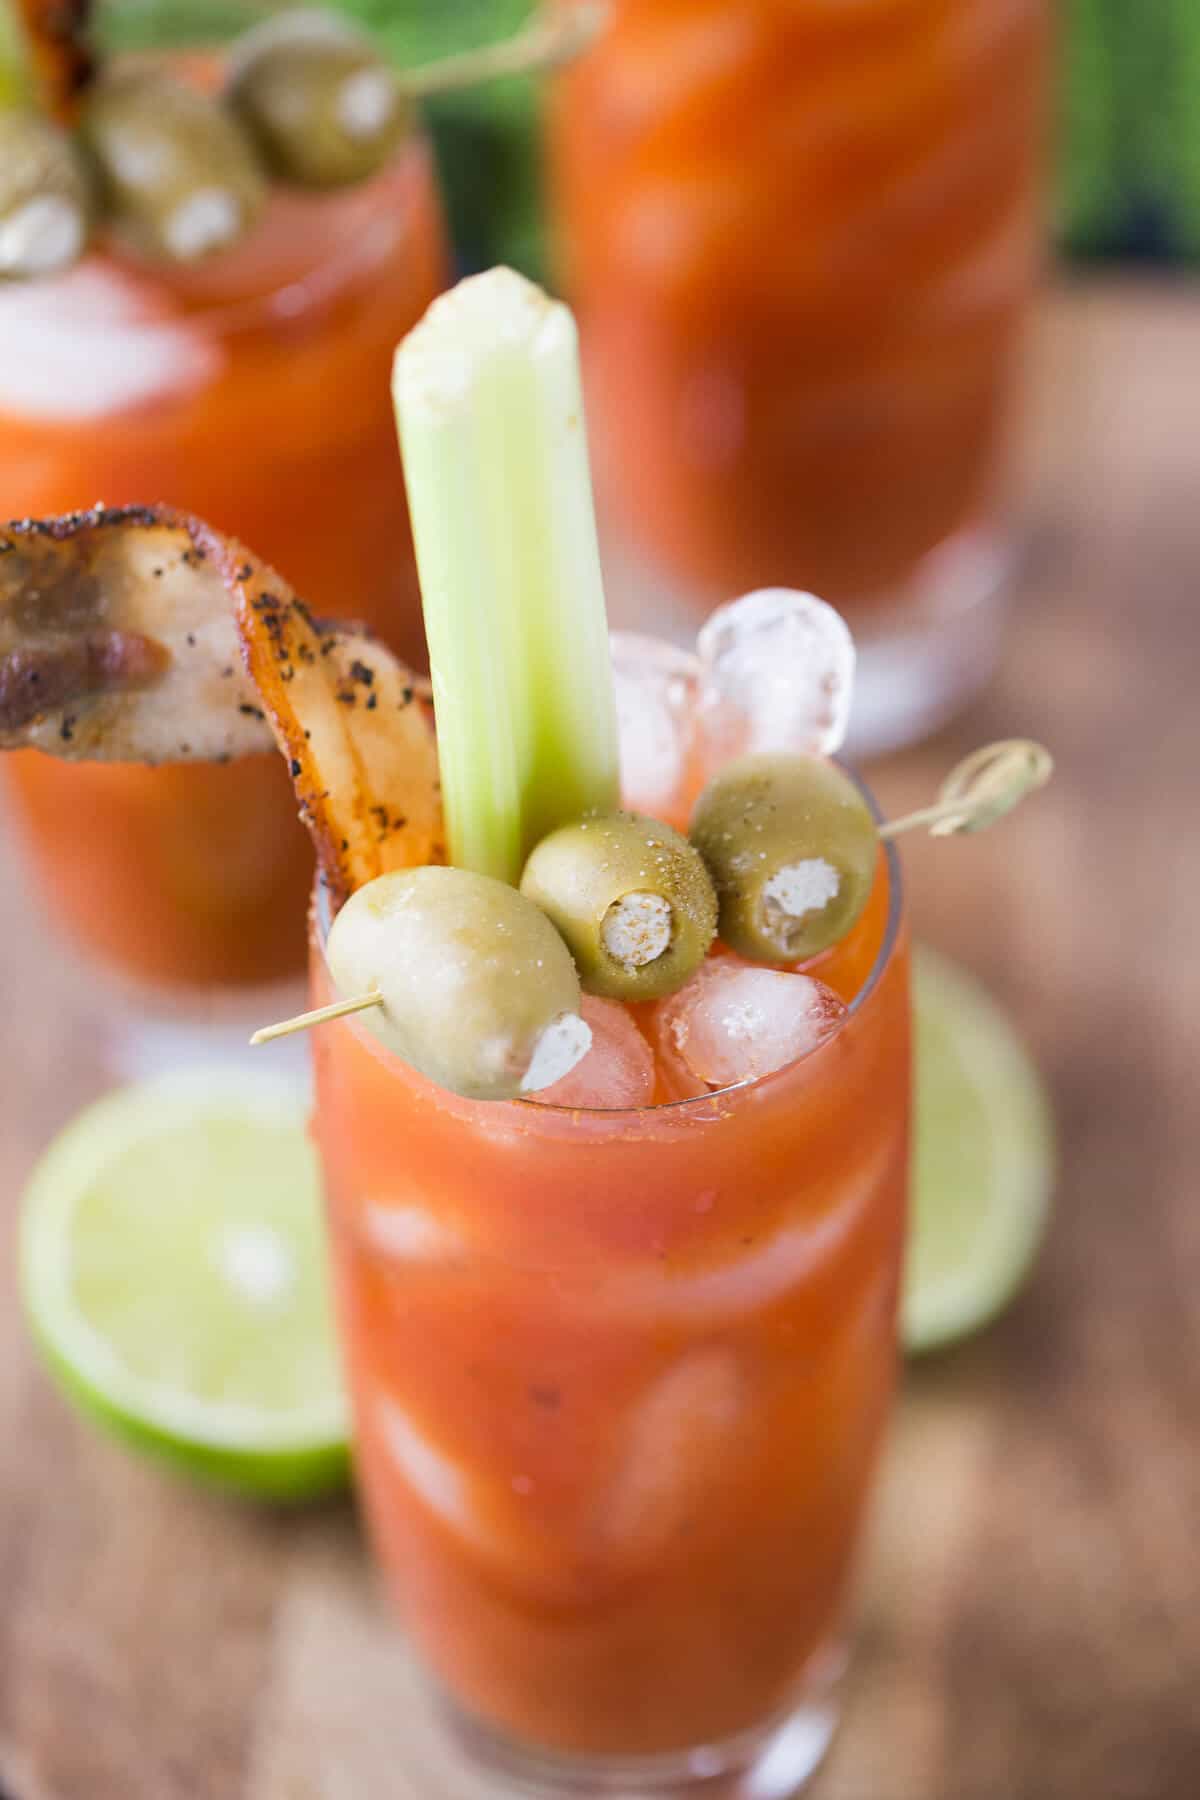 Who's a fan of Bloody Mary's? This cocktail is for those who like a little spice! lemonsforlulu.com